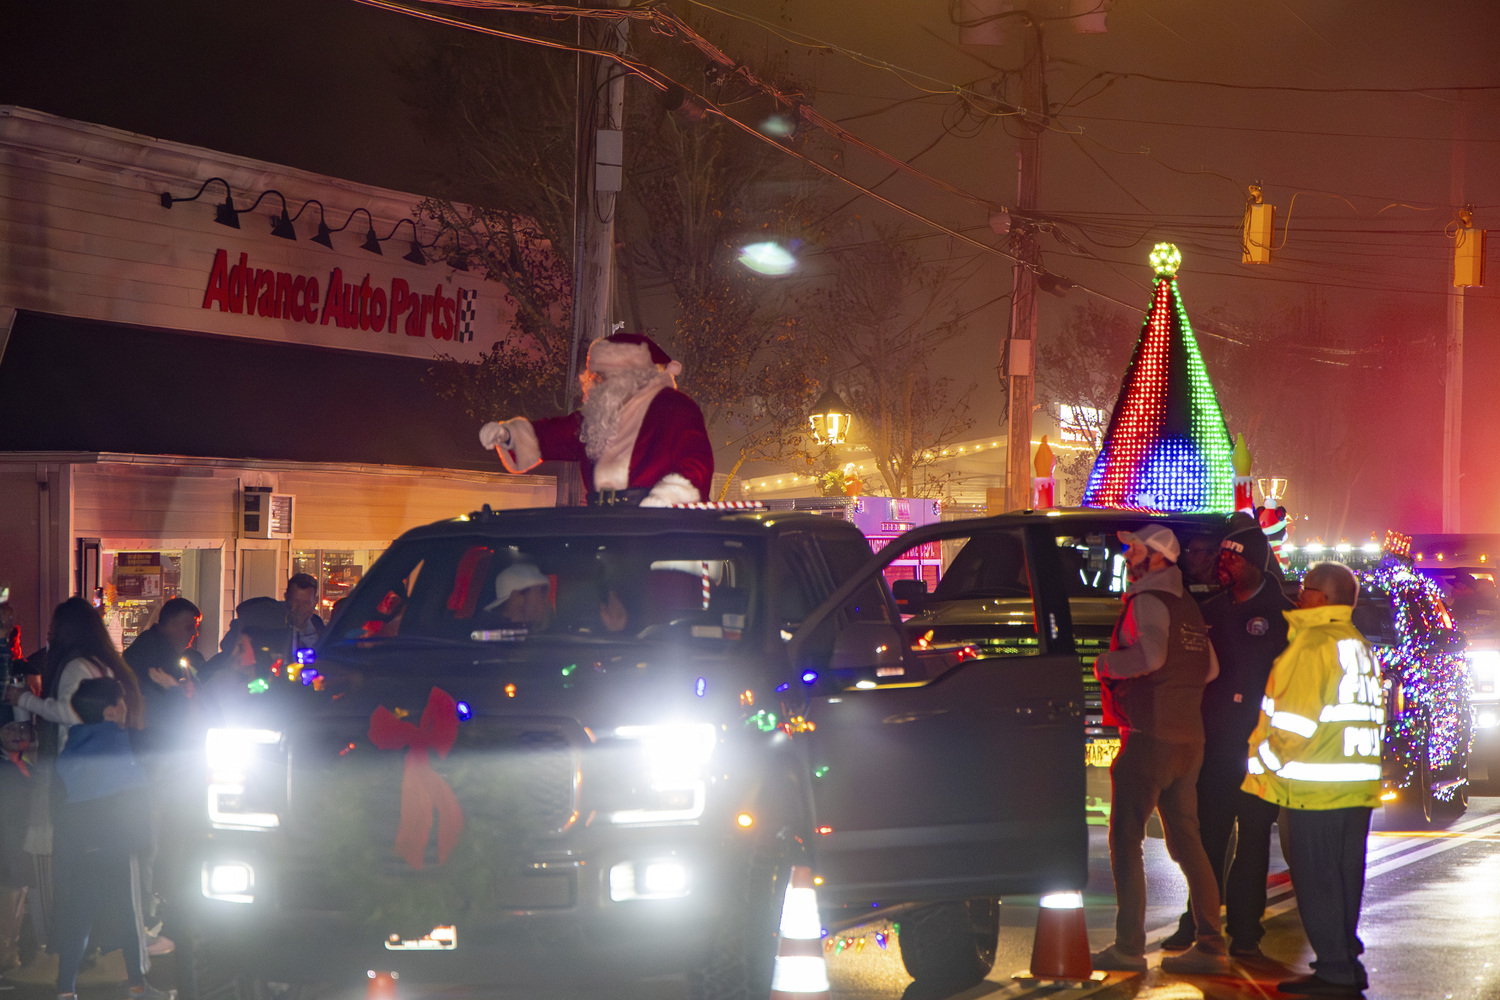 Santa arrived at the Hampton Bays firehouse after a parade through town on Saturday carolers performed and the tree was lighted.   MICHAEL O'CONNOR